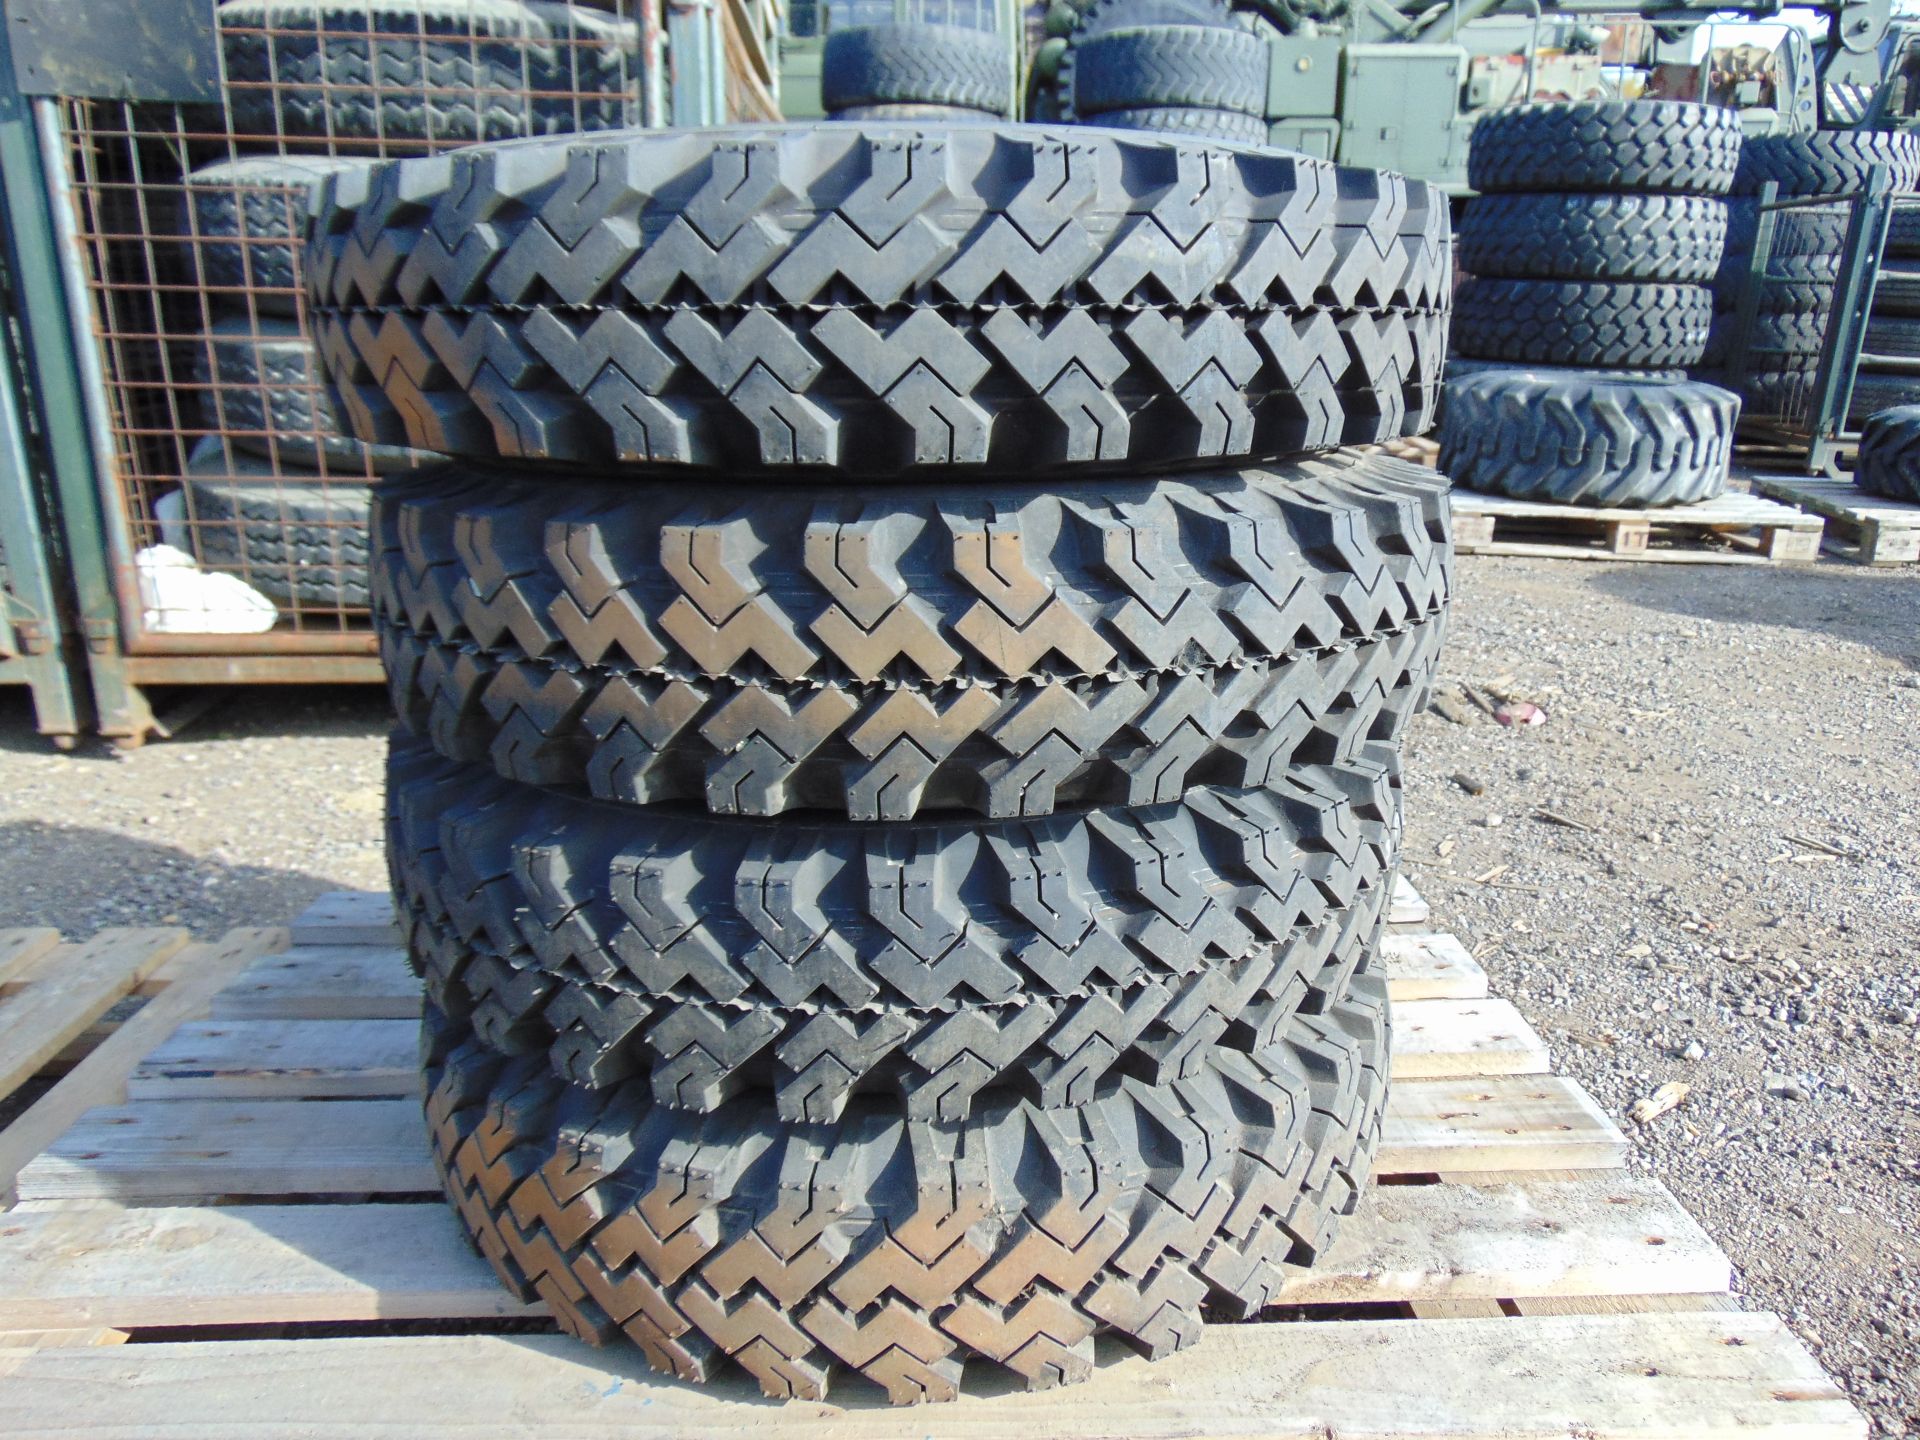 4 x Deestone Extra Traction 6.00-16 Tyres with 5 Stud Rims - Image 2 of 7